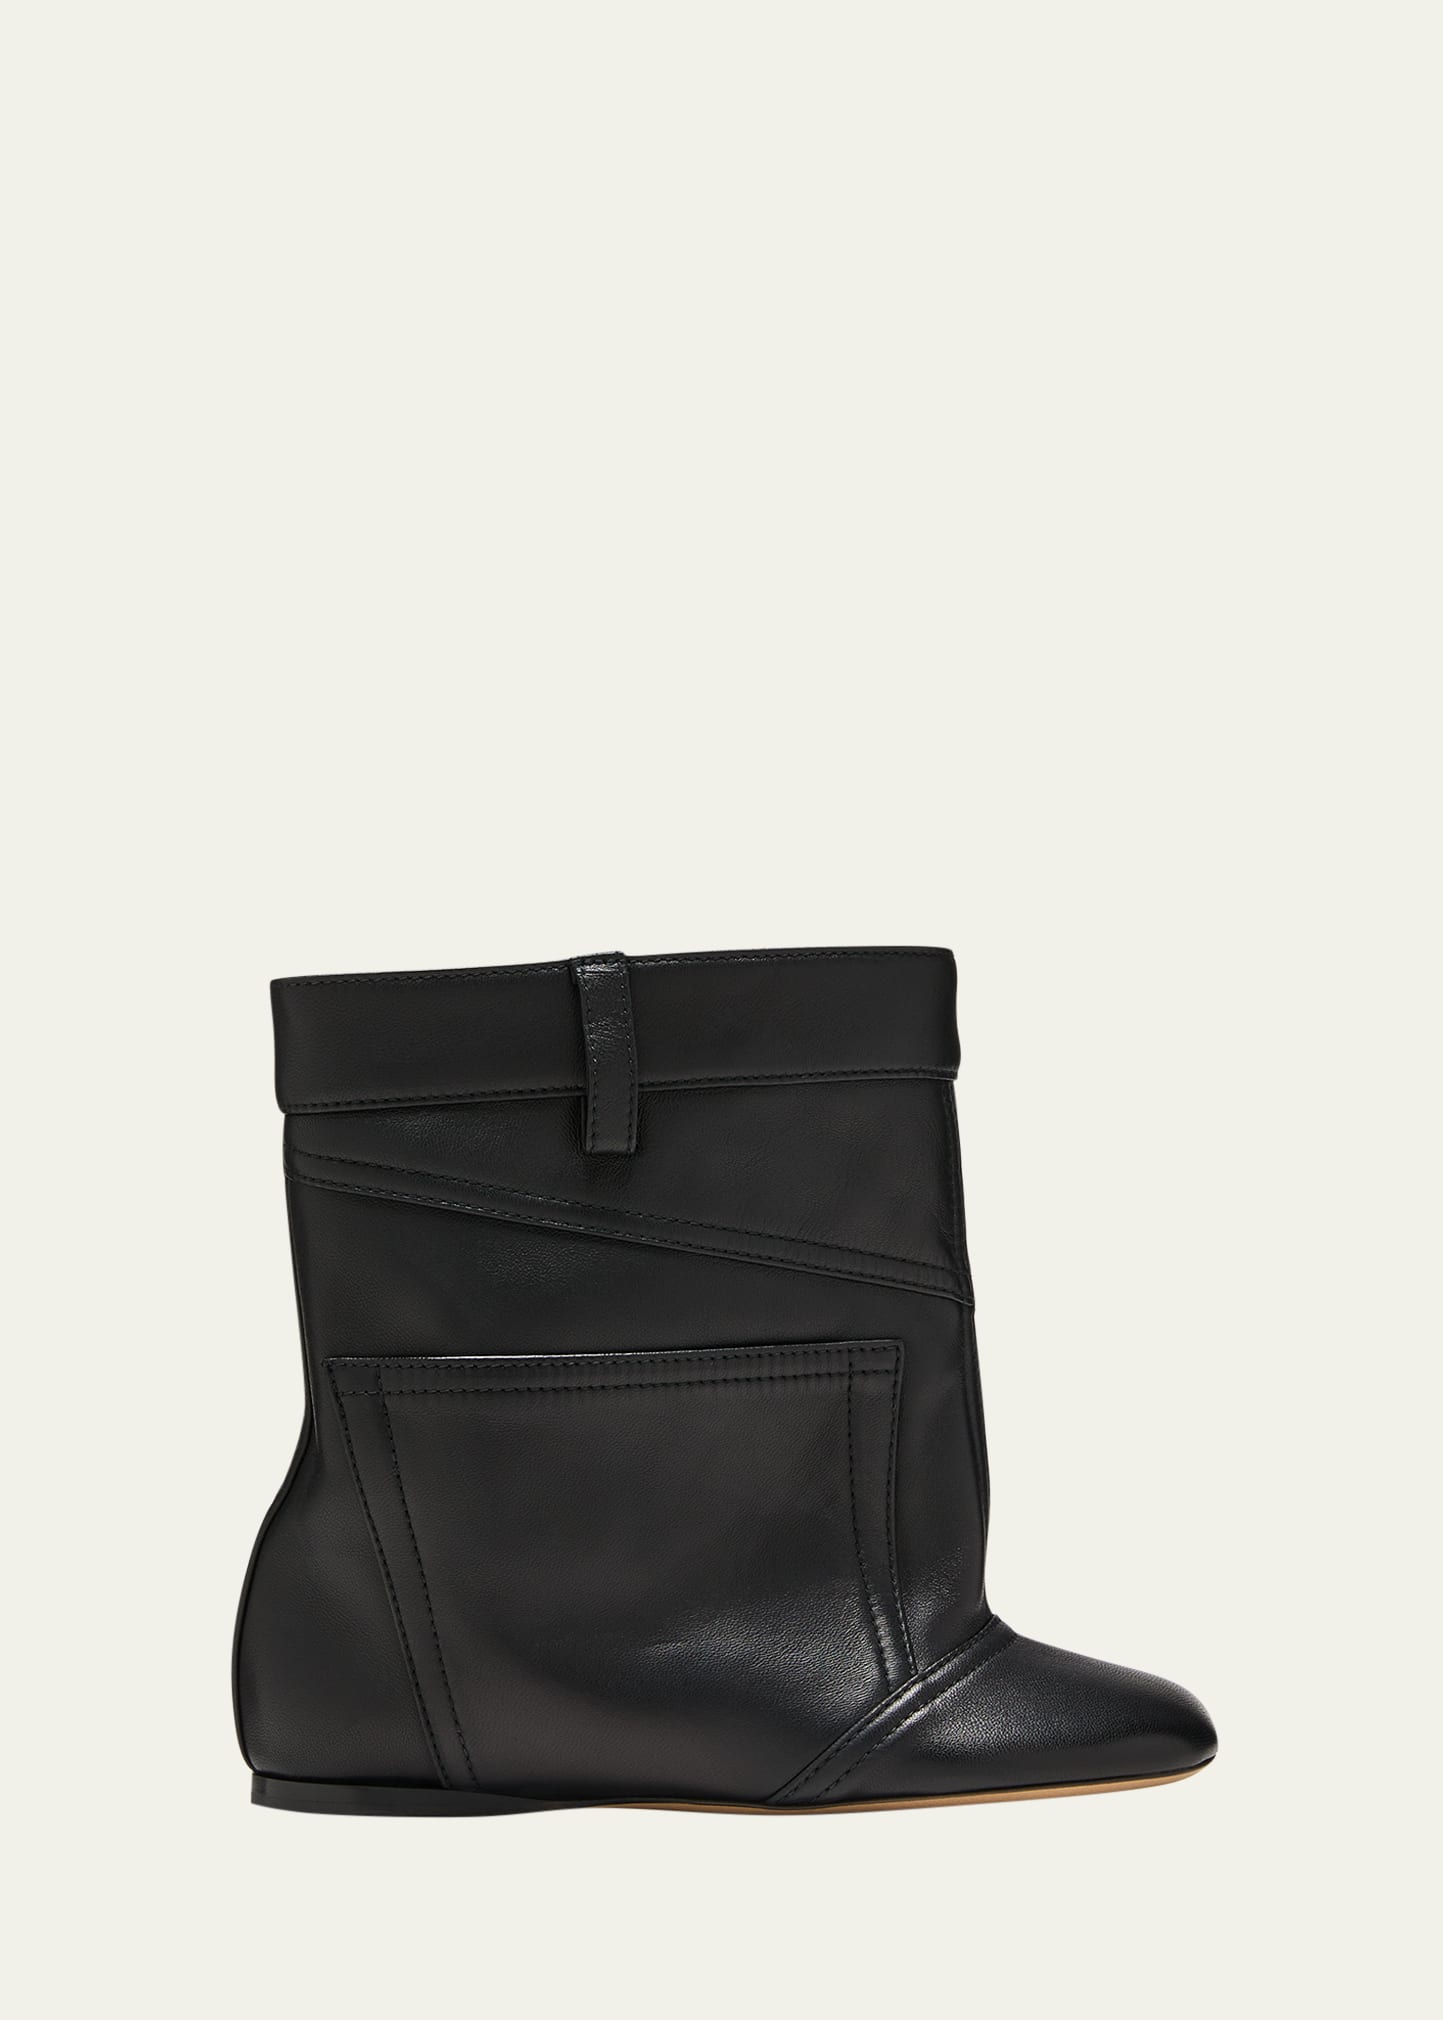 Loewe Toy Panta Ankle Leather Boots In Black